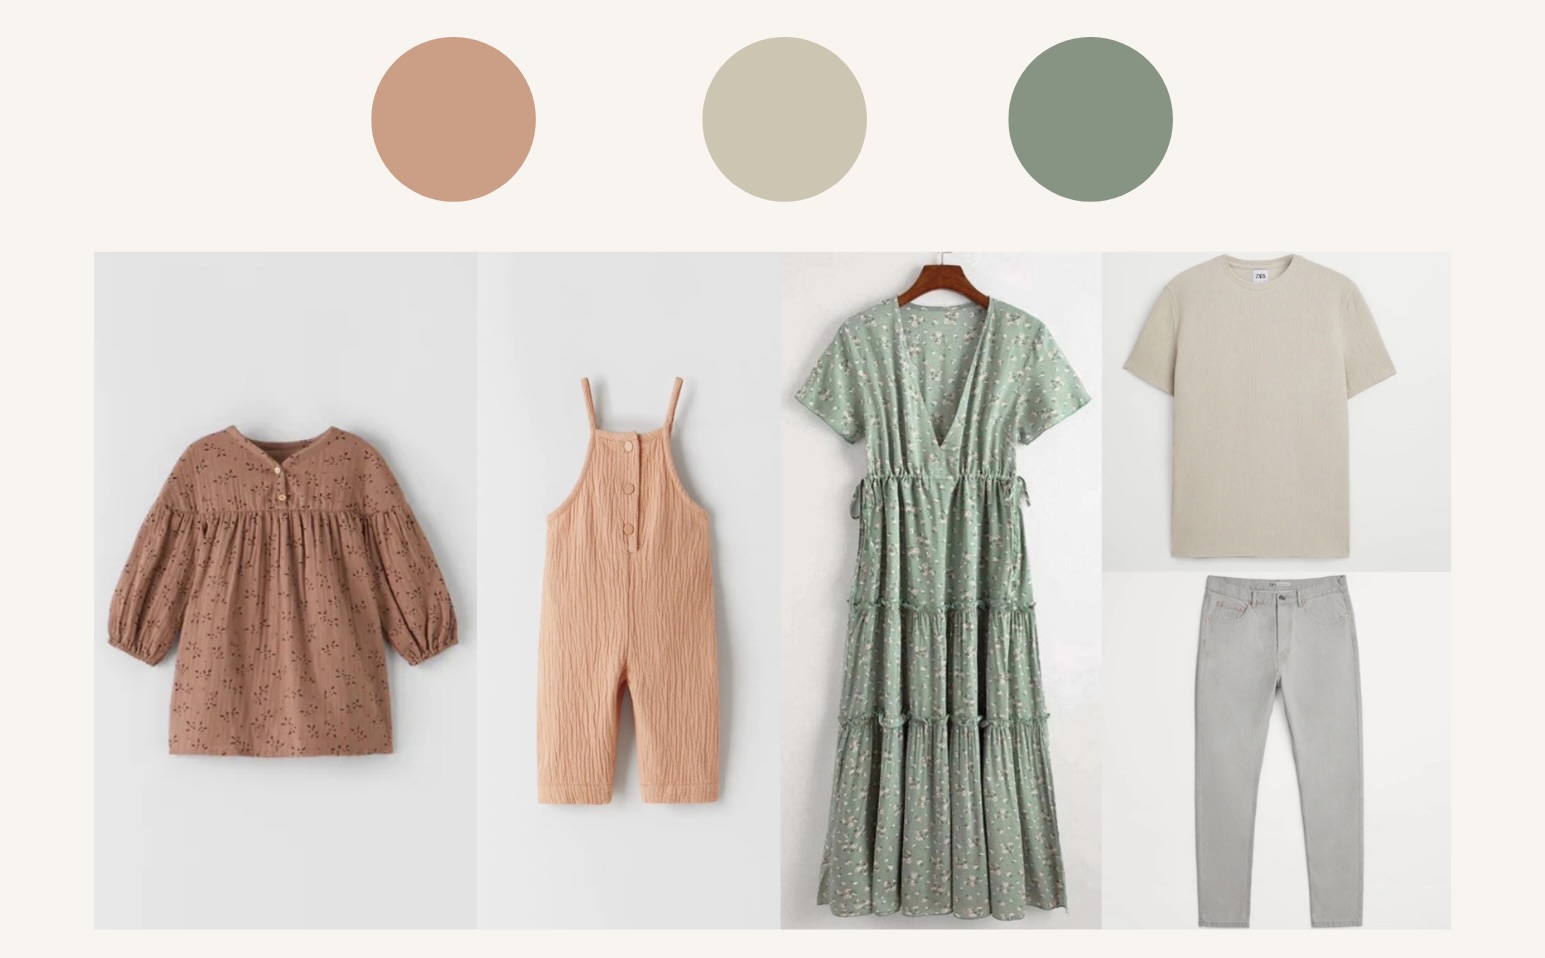 Family outfit idea with a color palette of coral, green and beige